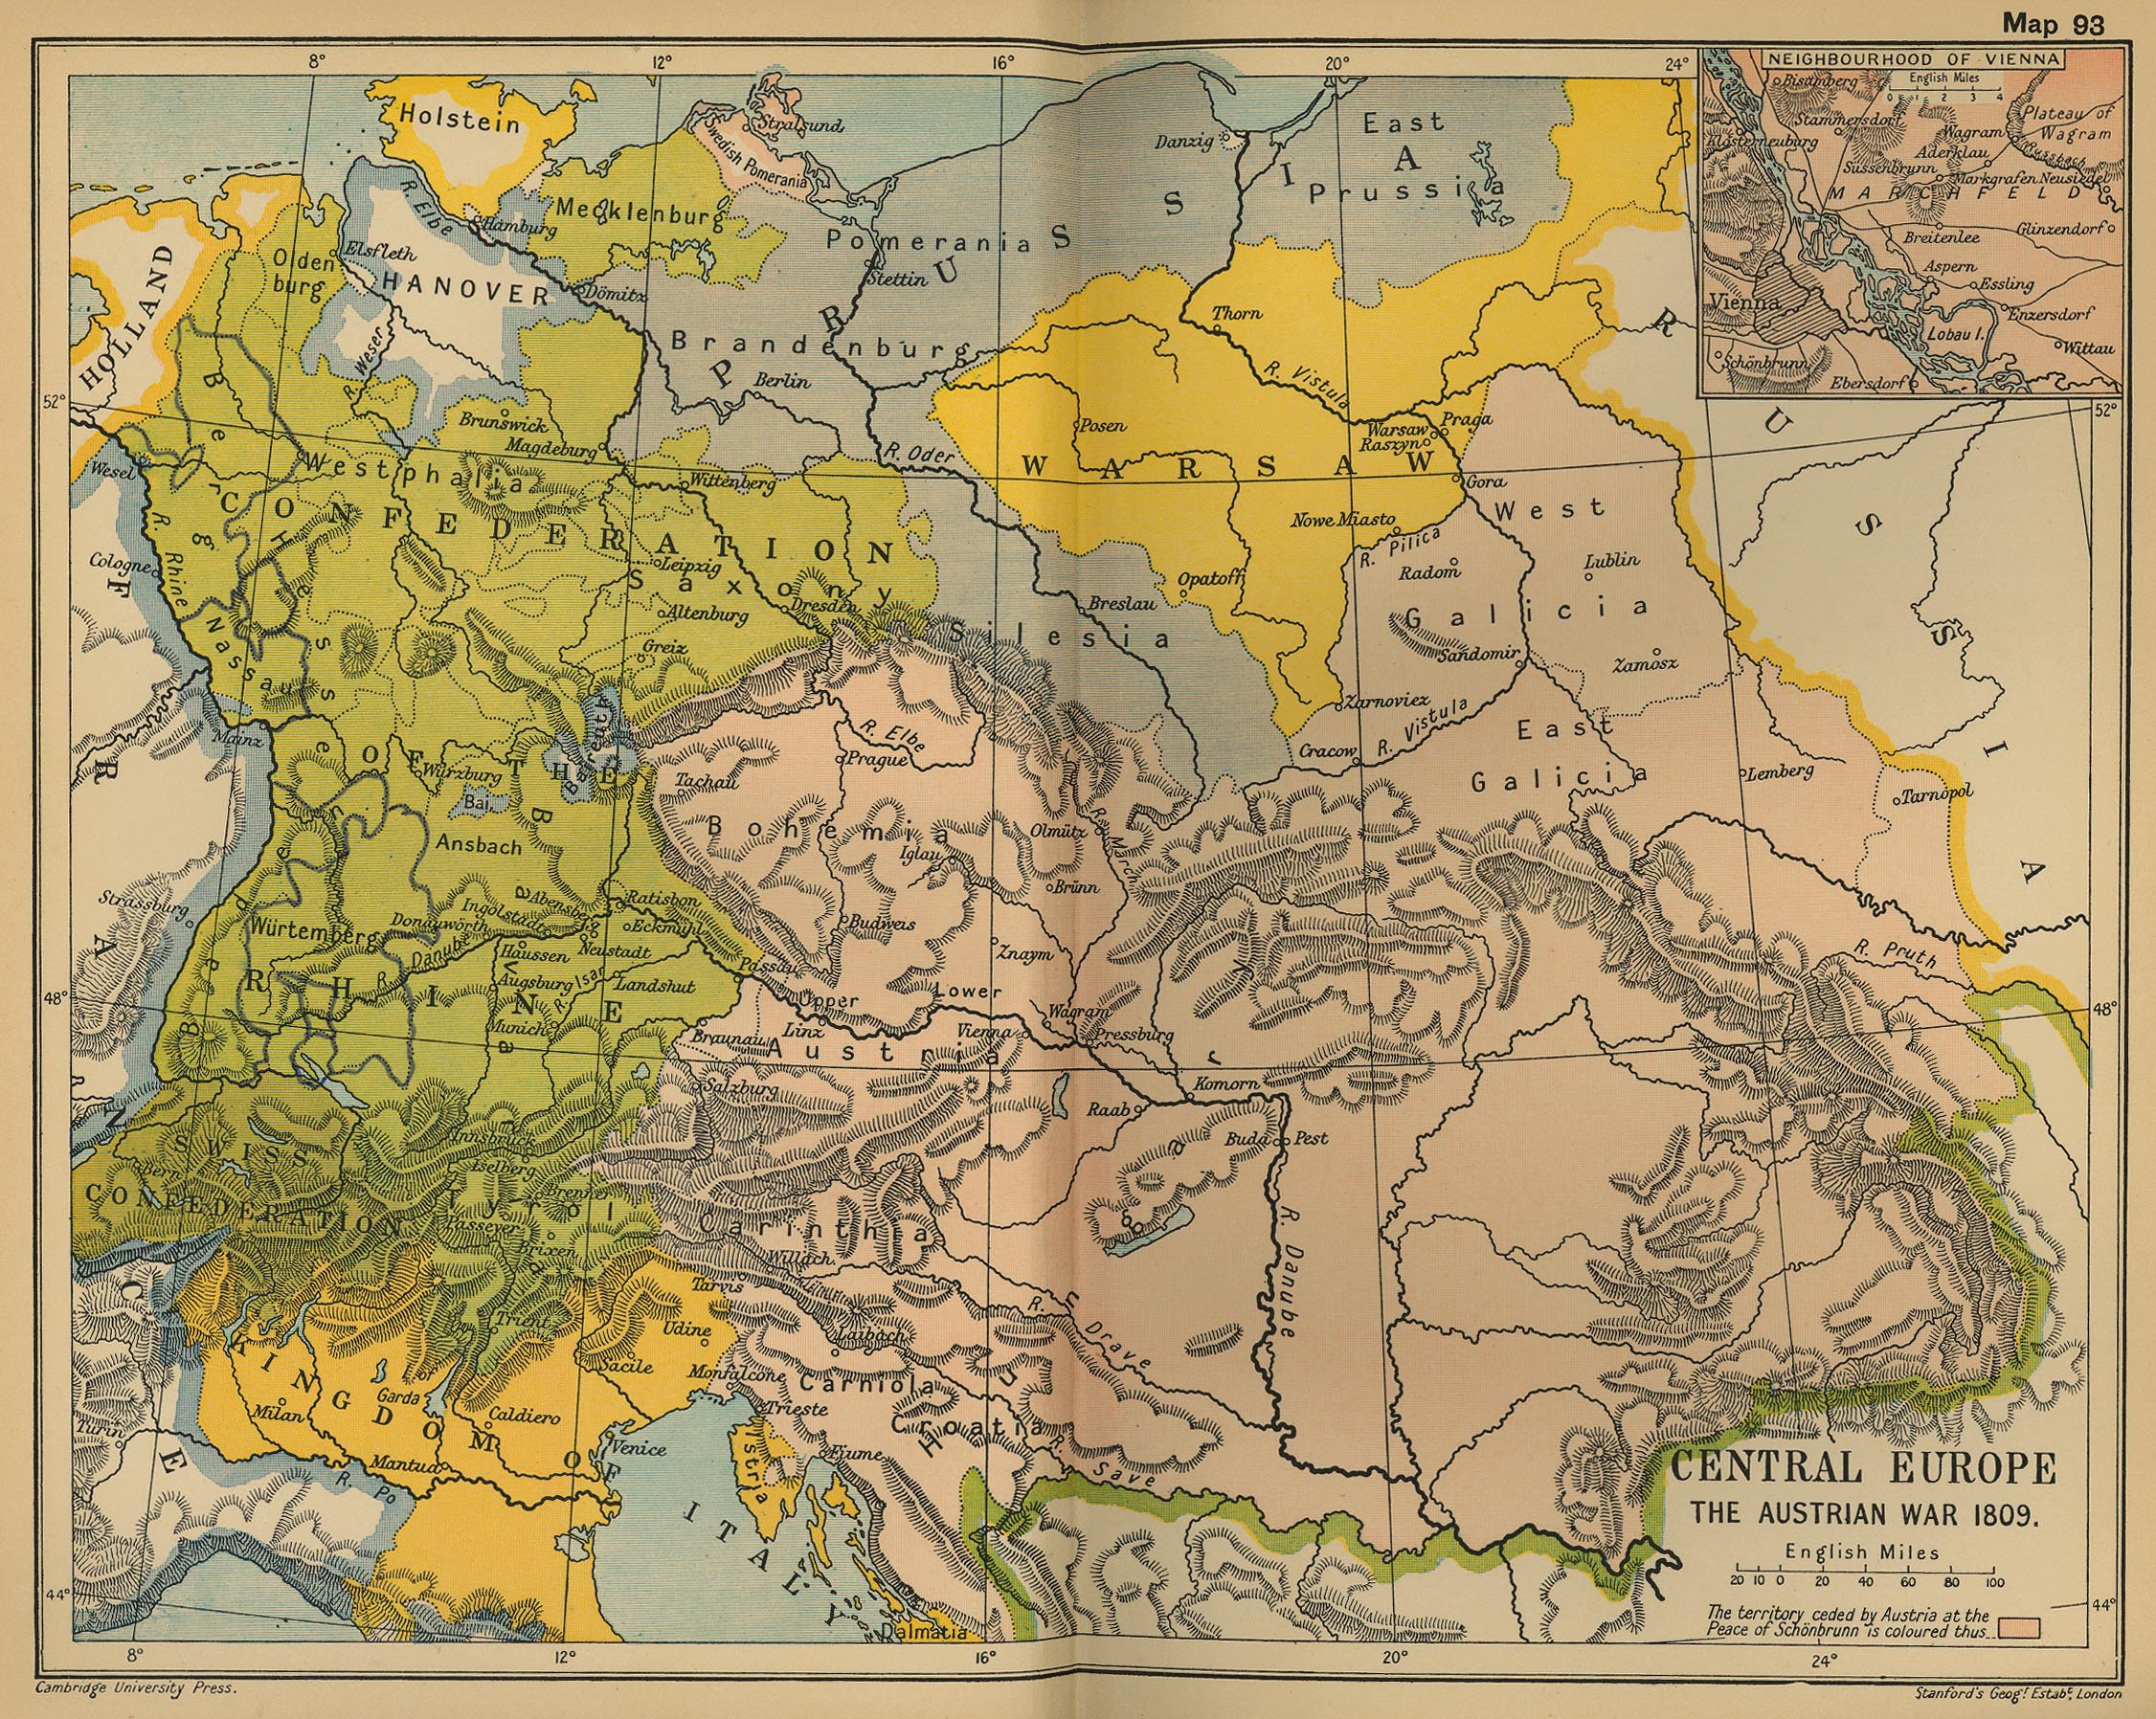 Map of Central Europe 1809: The Austrian War and the Treaty of Schoenbrunn